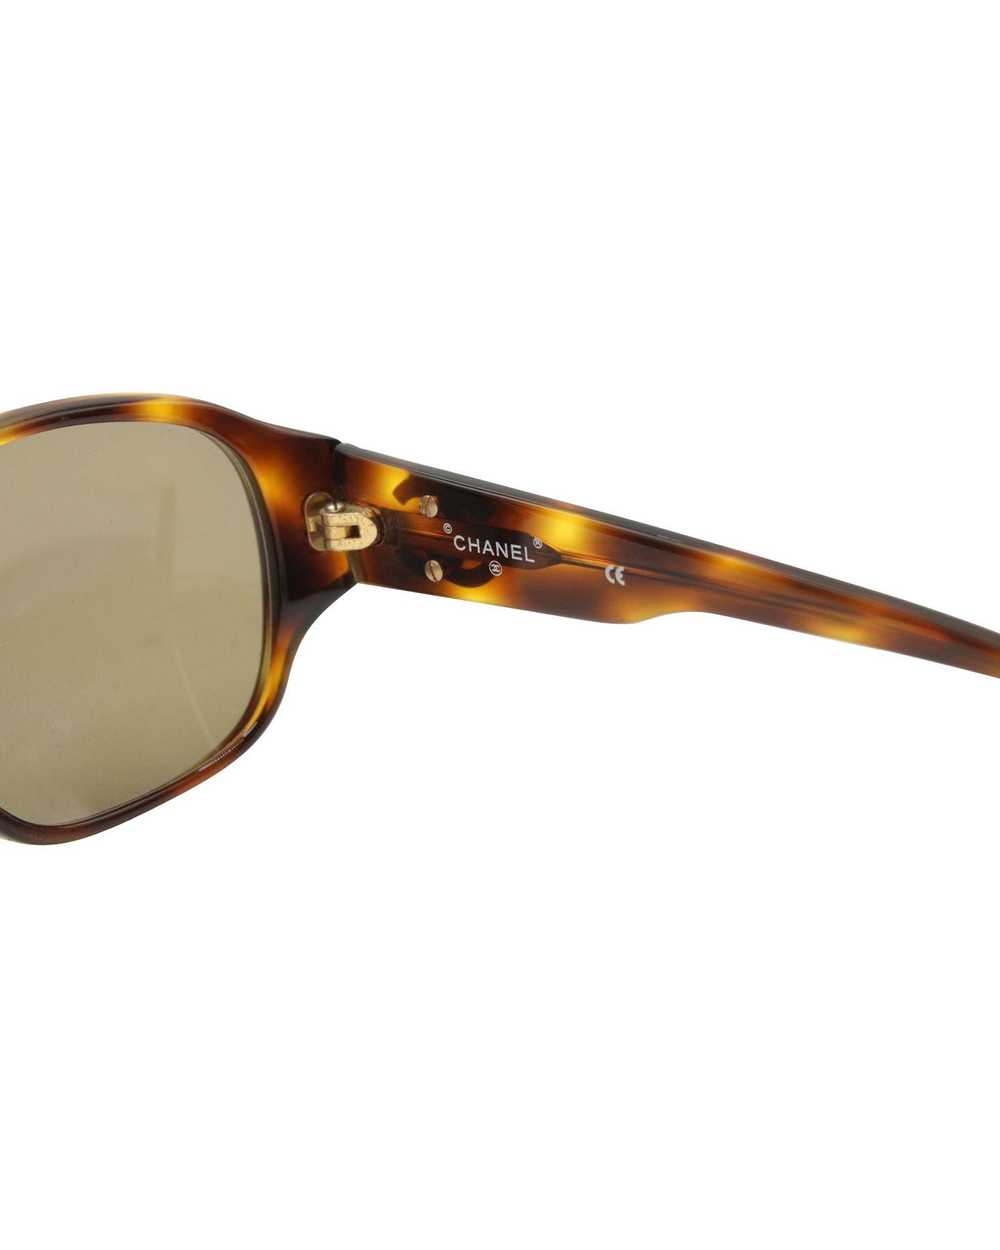 Product Details Chanel Tortoise Shell Sunglasses - image 5